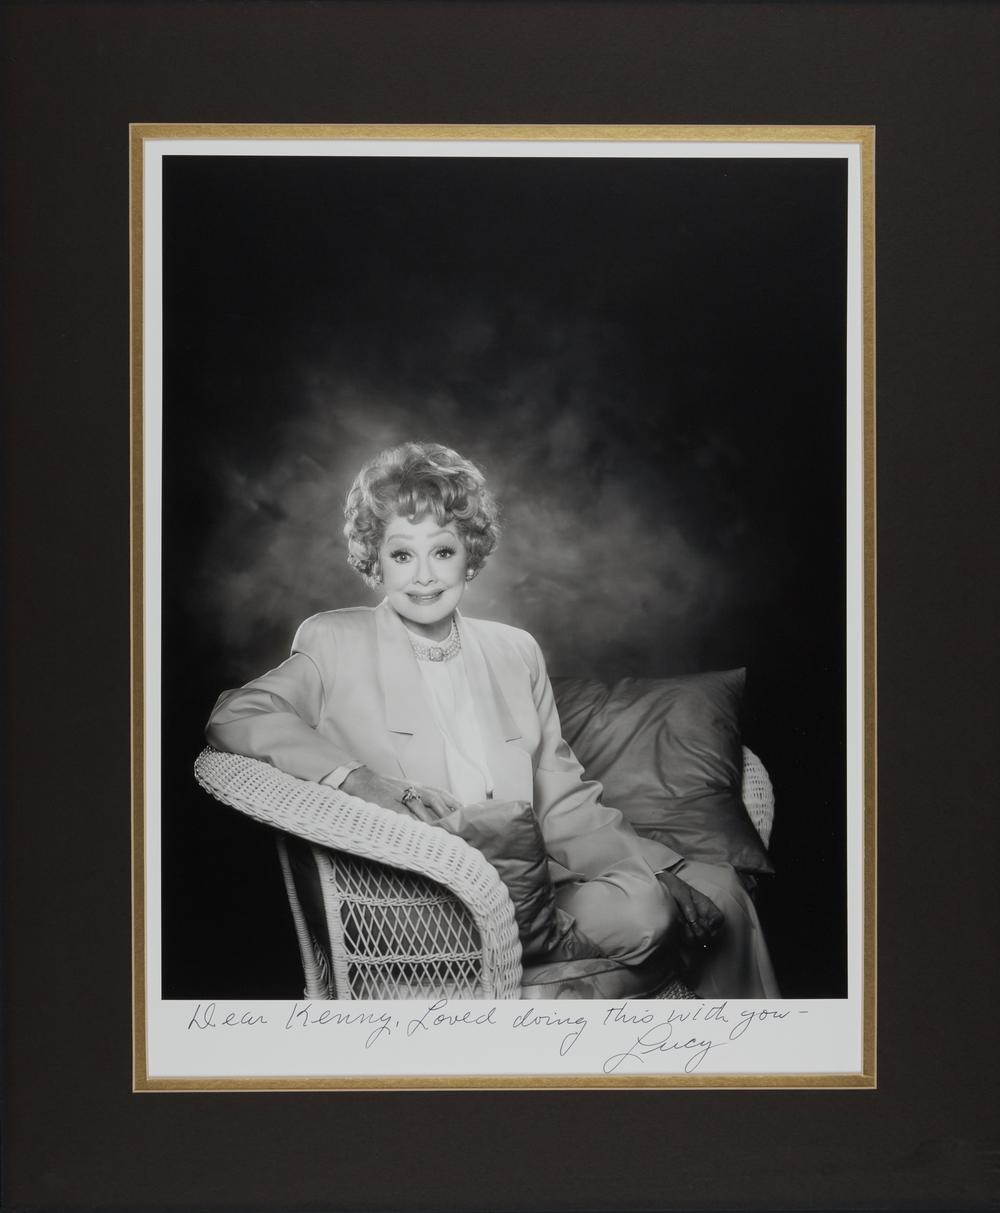 An original photographic portrait of Lucille Ball taken by Kenny Rogers that is additionally signed by Lucille Ball, "Dear Kenny, Loved doing this with you-/ Lucy."